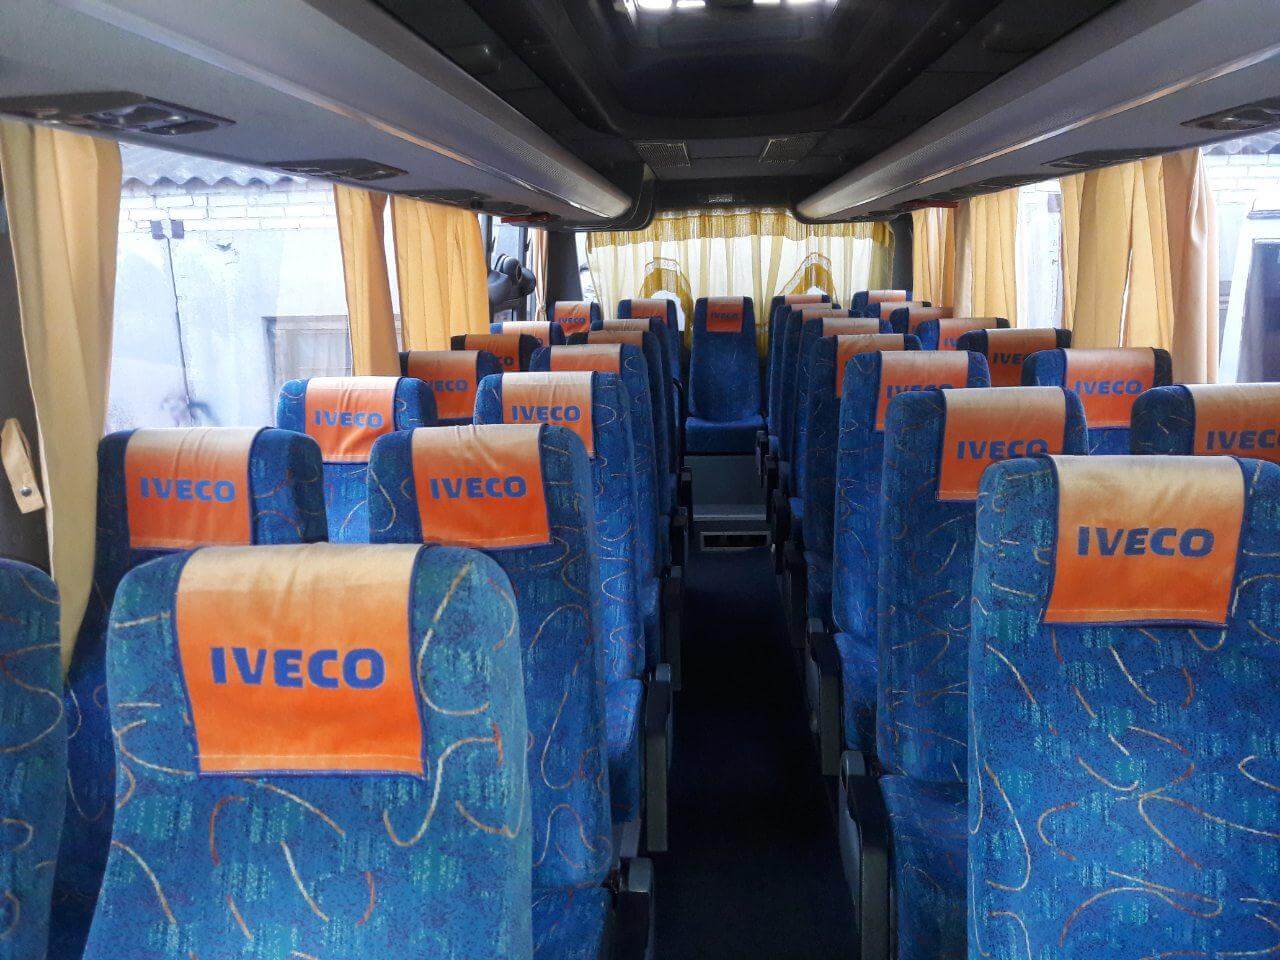 Rent a 30 seater Standard Coach (iveco iveco 2012) from Yourtransfer.it from Roma 